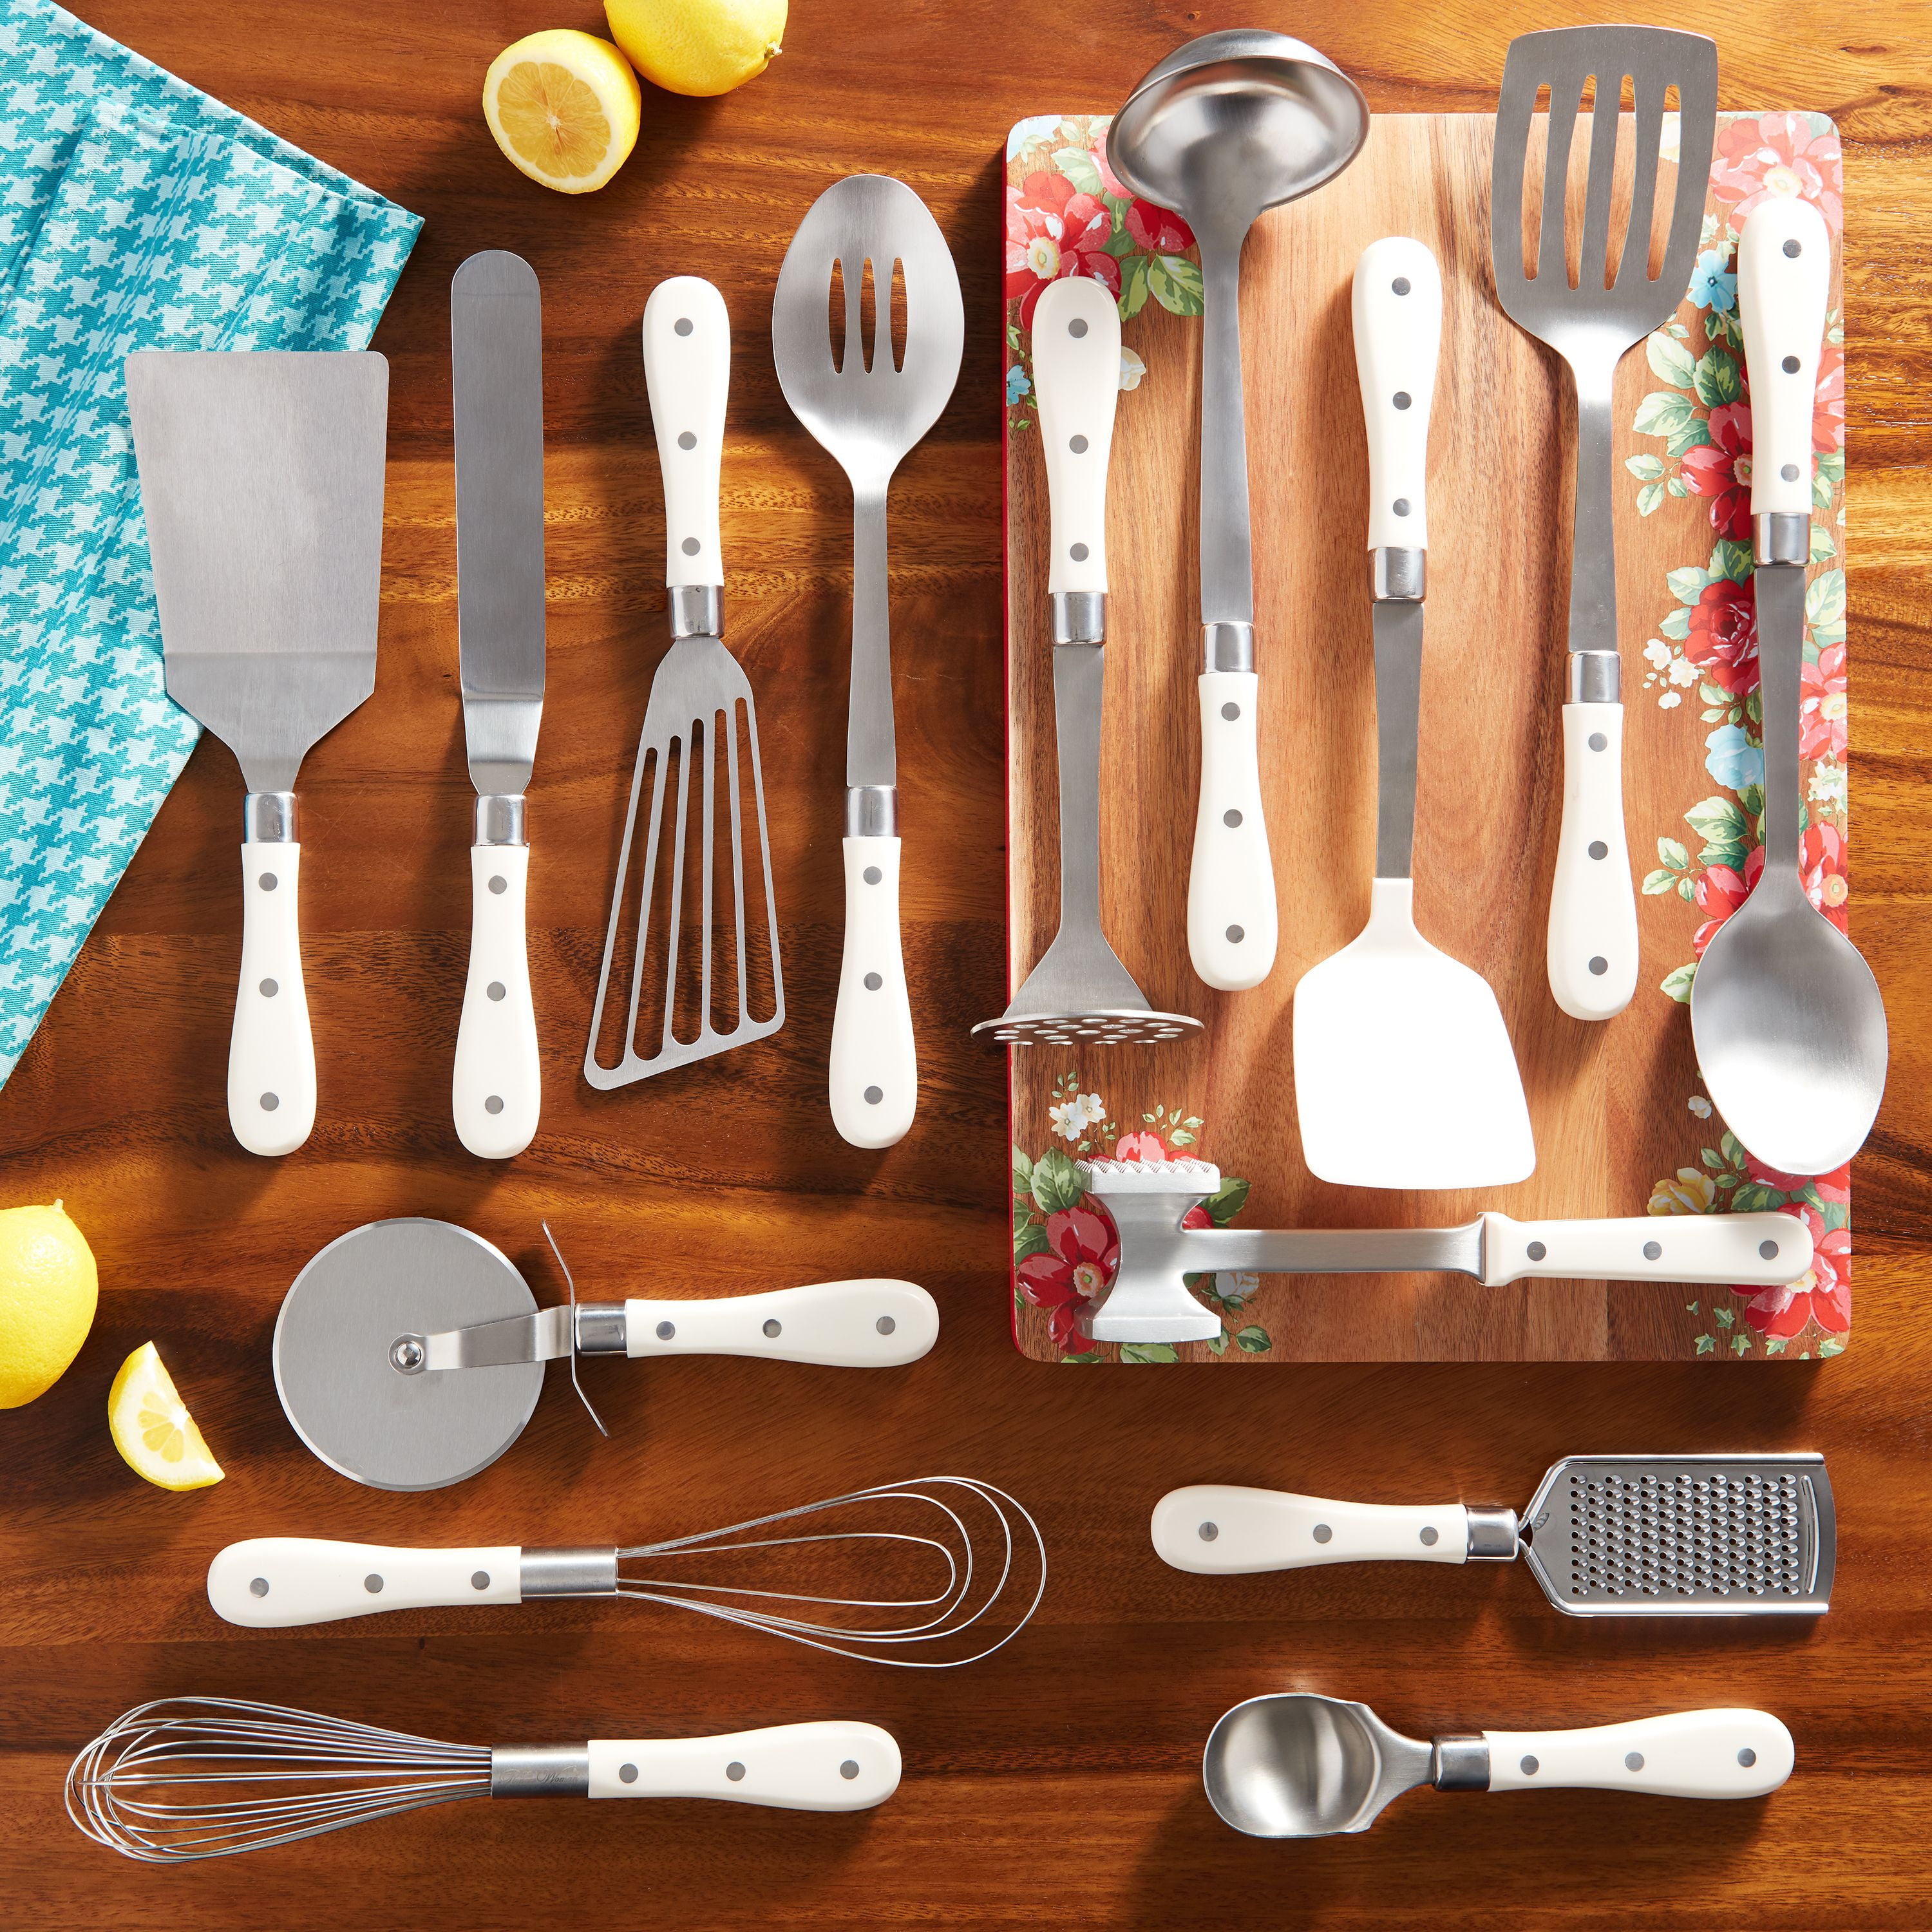 The Pioneer Woman Frontier Collection 15-Piece All In One Tool and Gadget Set in Turquoise & Cutlery Set 14-Piece in Turquoise 